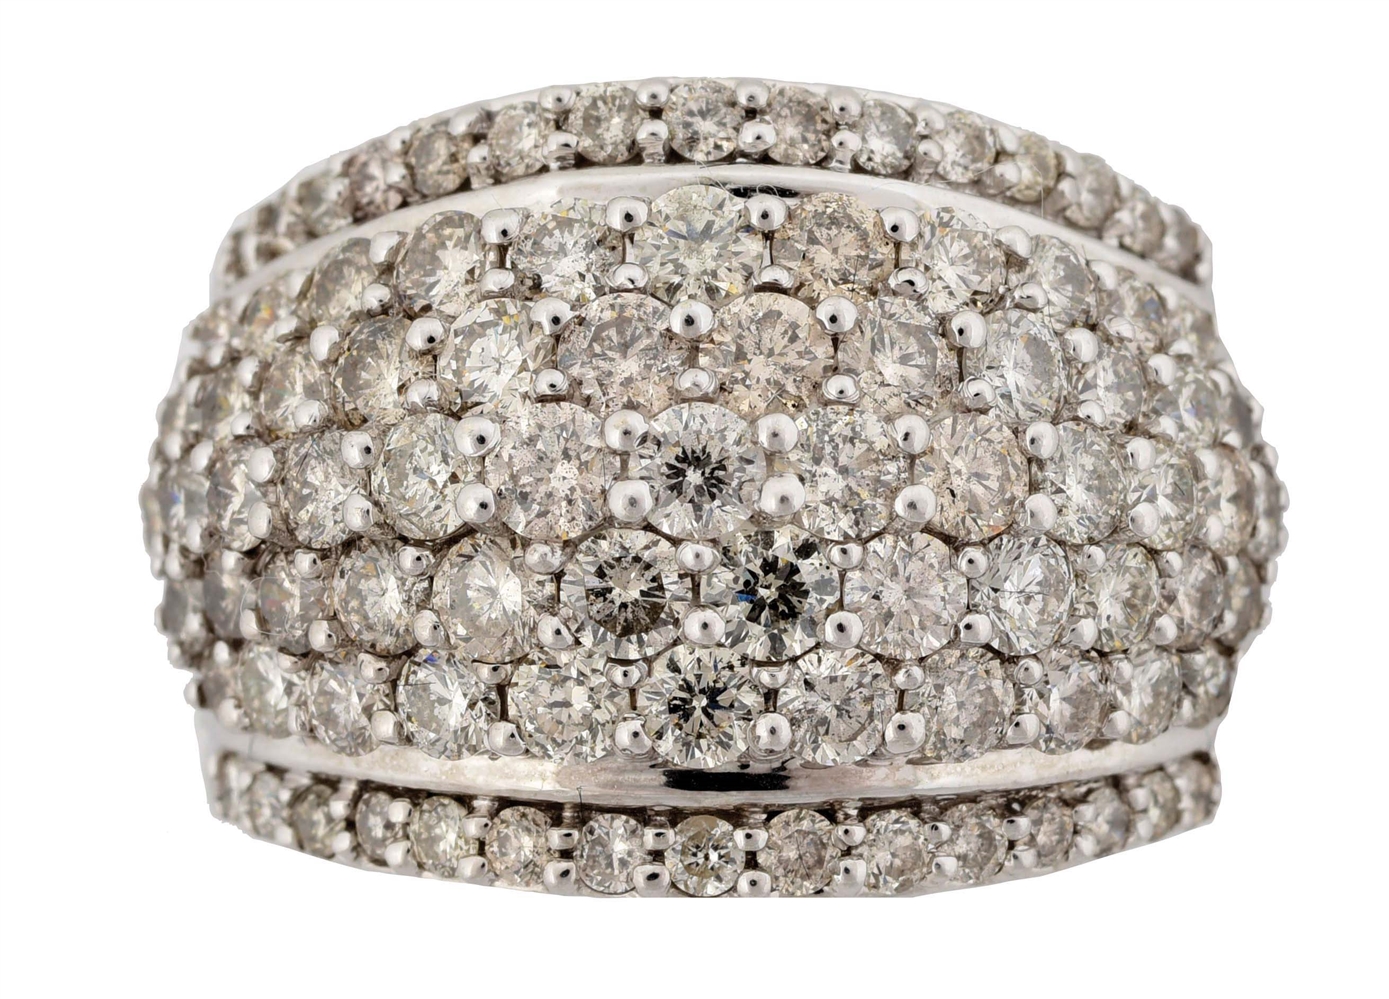 LADYS 14K WHITE GOLD DOME-STYLE DIAMOND RING WITH APPRAISAL.